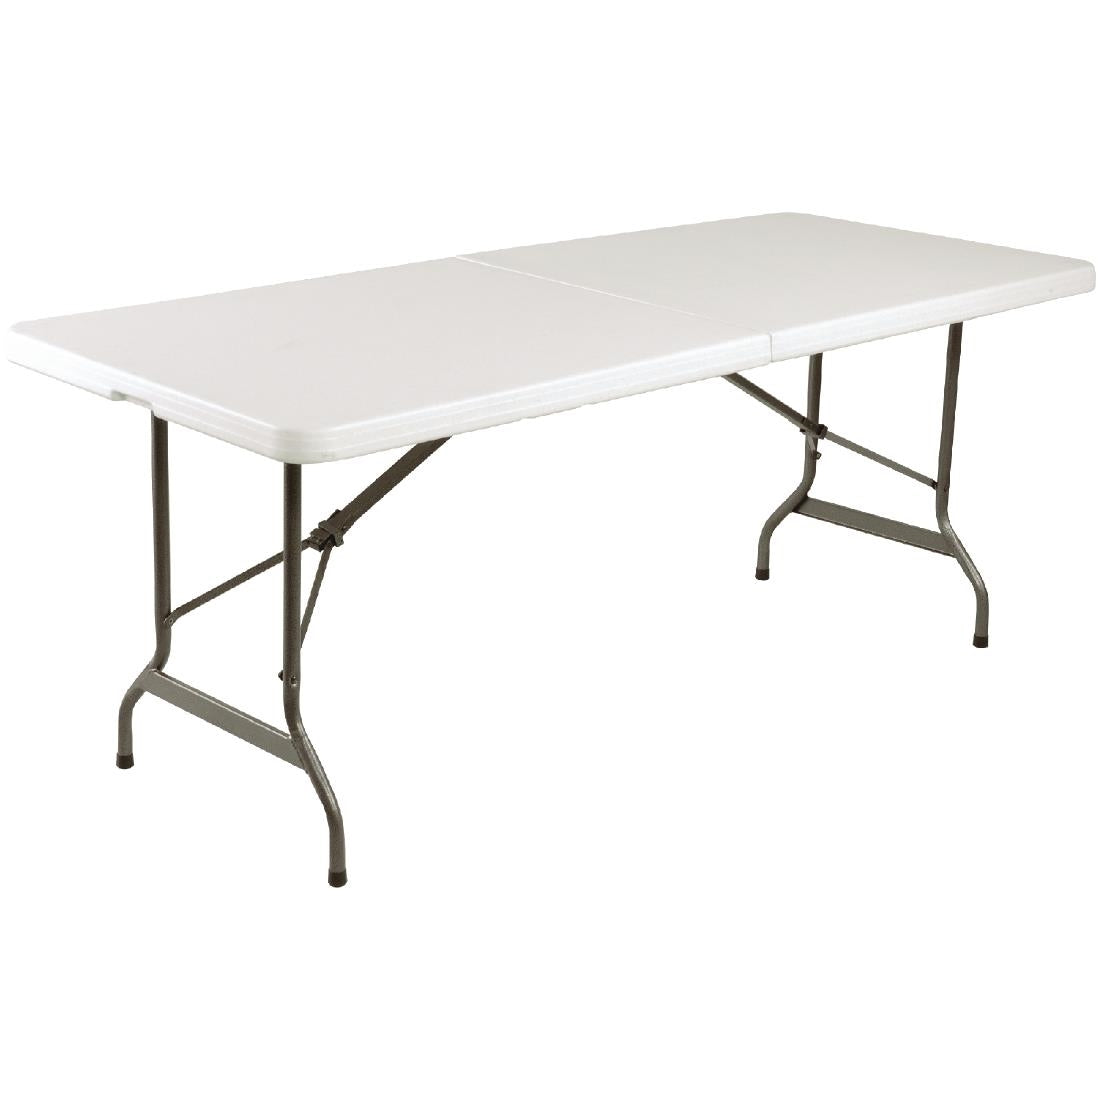 Bolero PE Centre Folding Table 6ft with Six Folding Chairs JD Catering Equipment Solutions Ltd